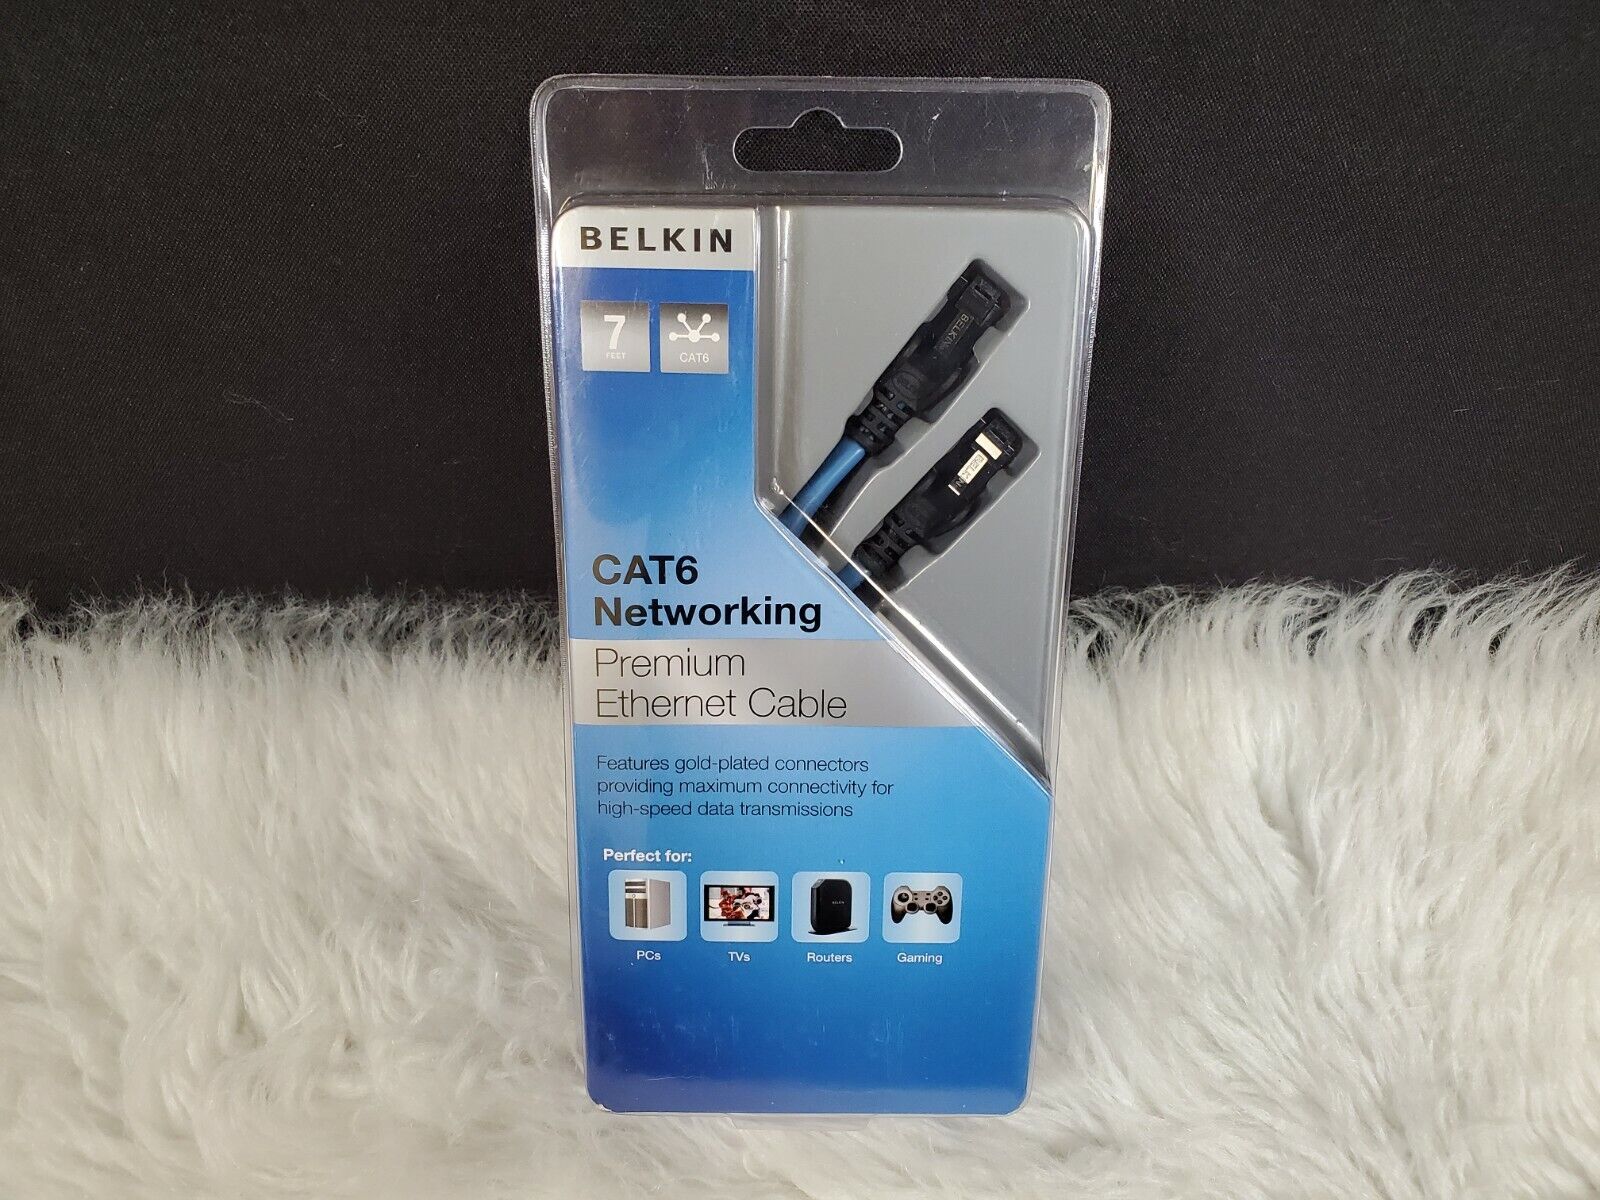 Belkin CAT6 Networking Premium Ethernet Cable - 7 Feet 8830-03814